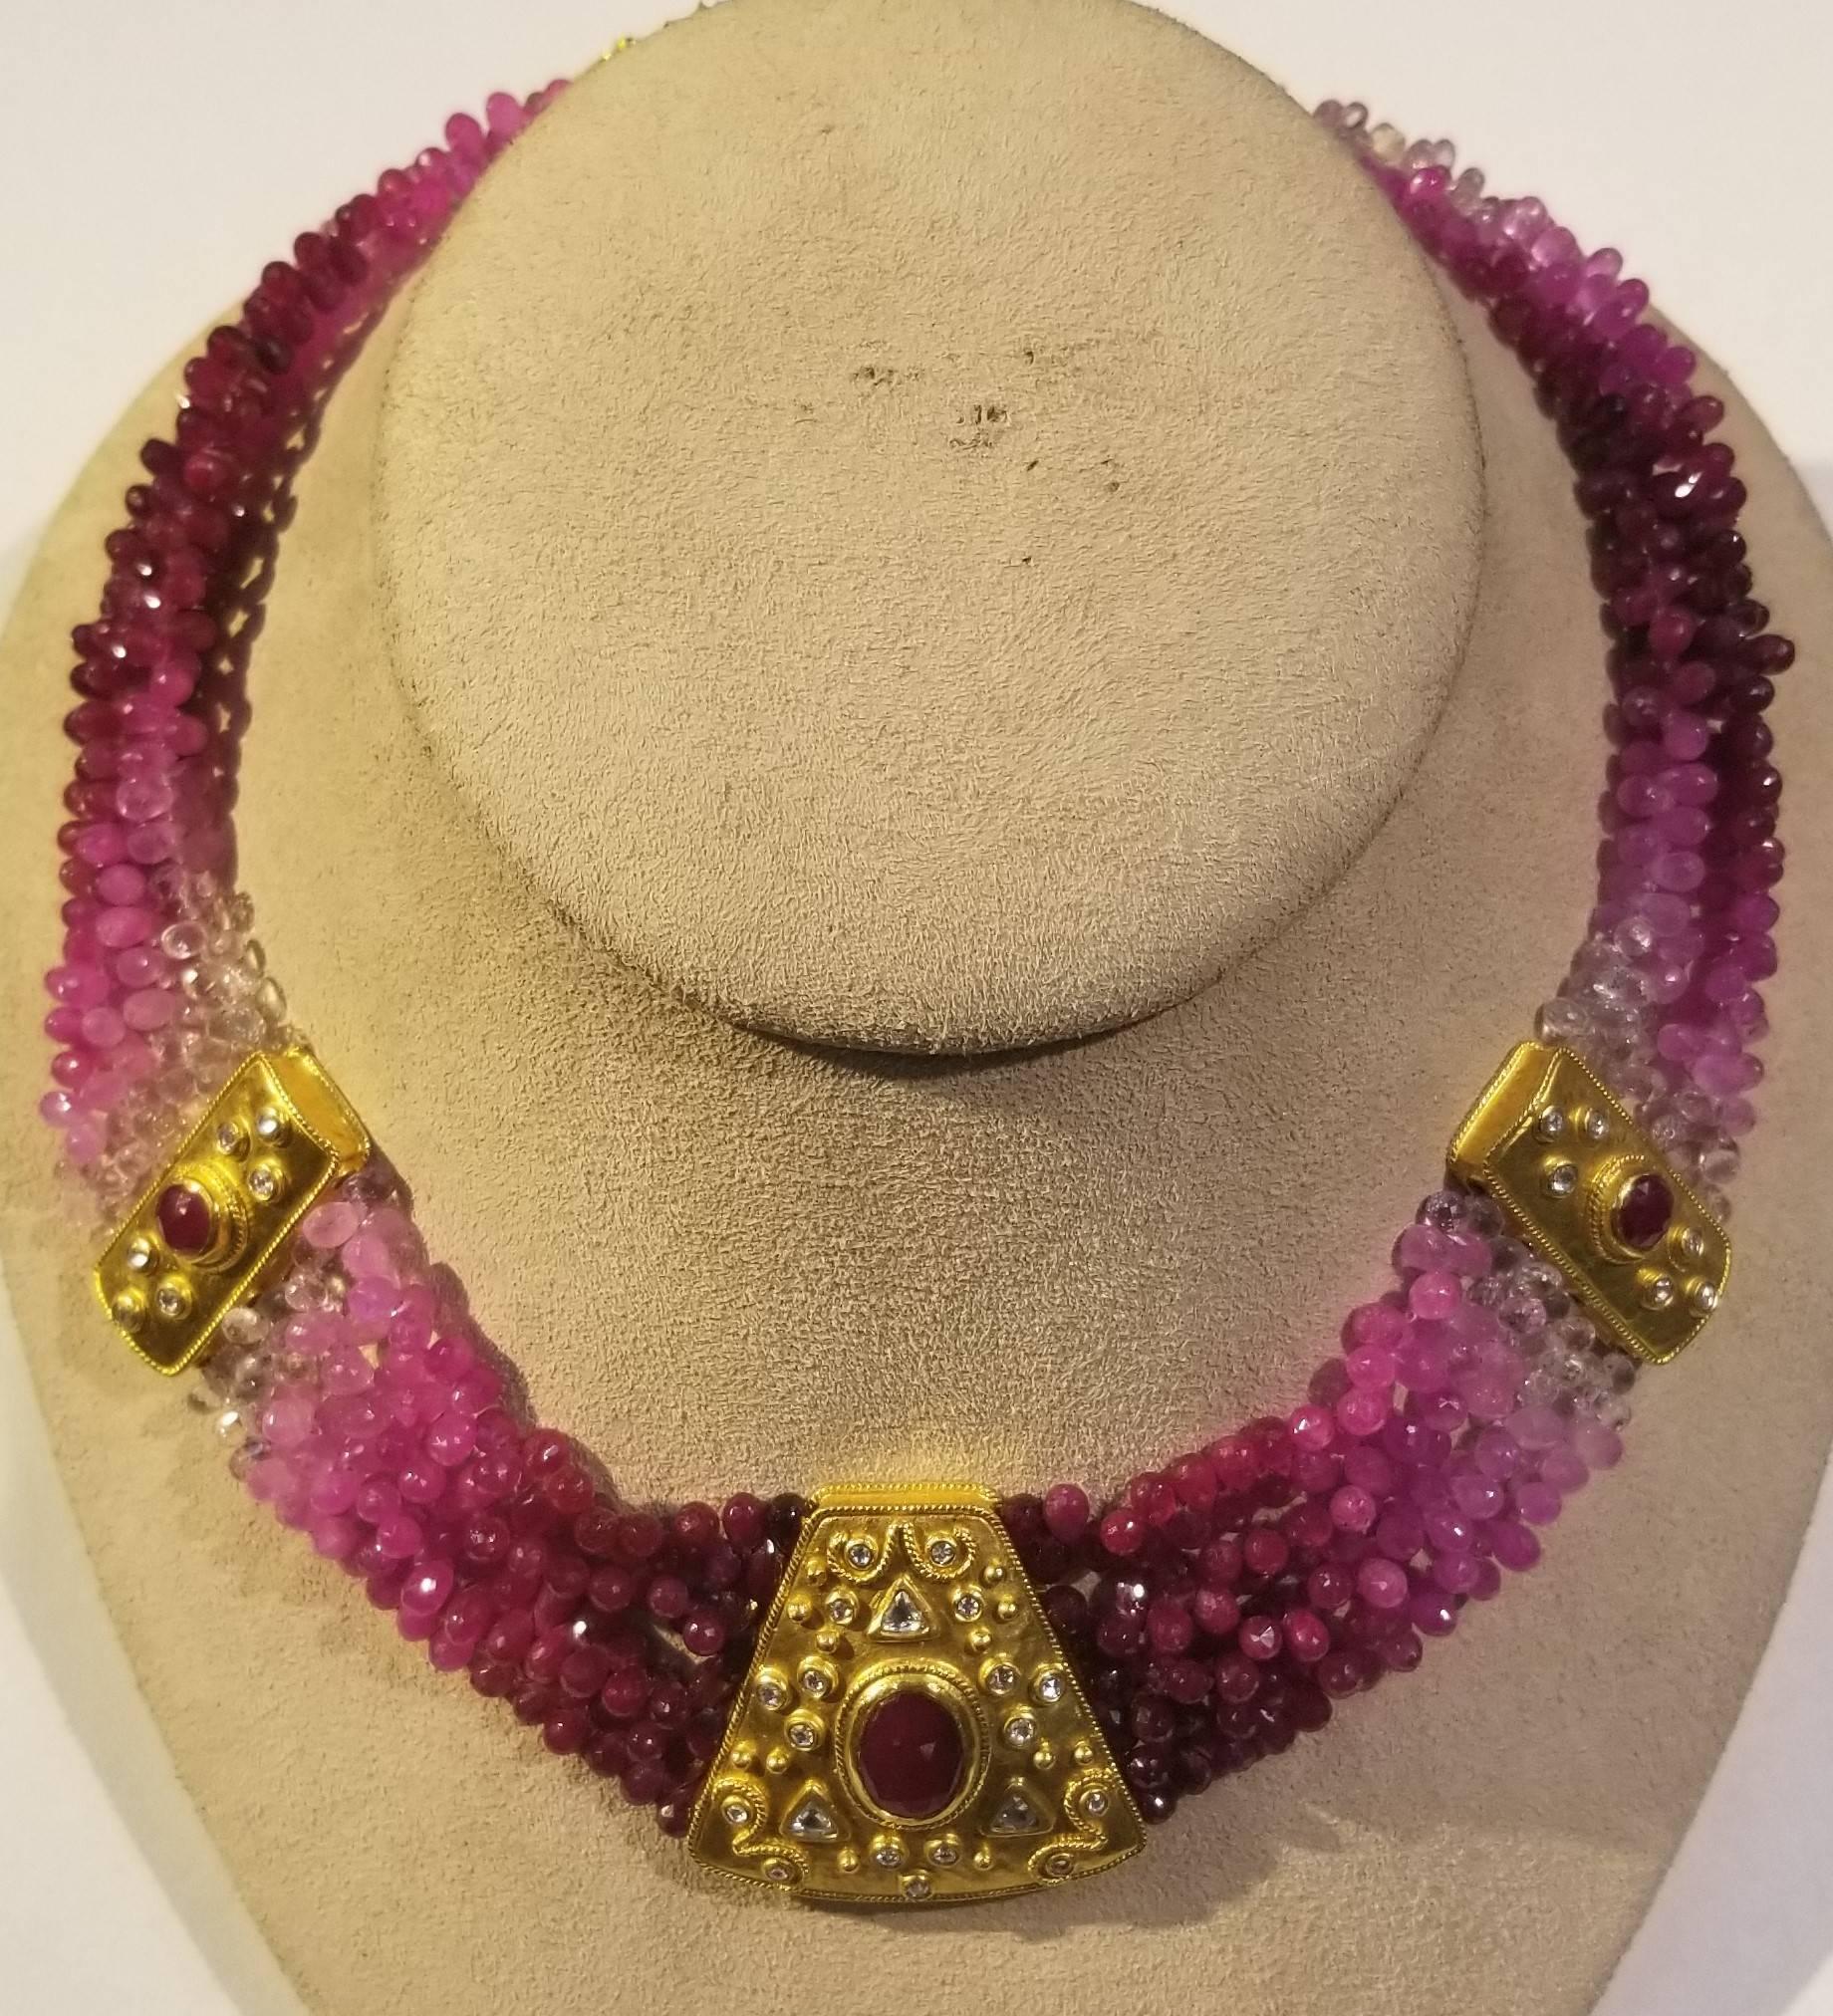 23 Karat Yg Ruby and Diamond Necklace In Excellent Condition For Sale In Santa Fe, NM